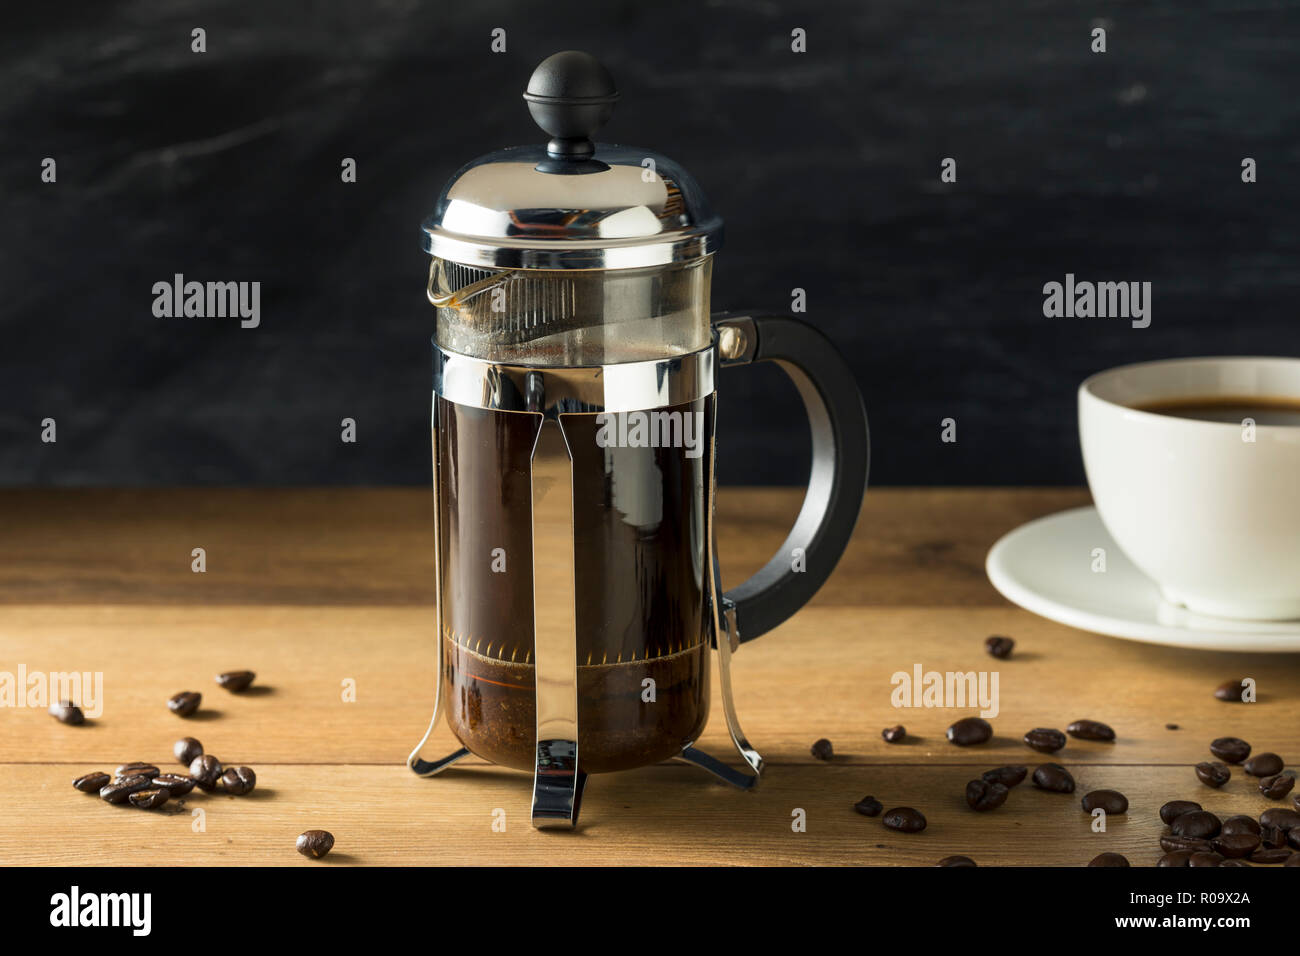 https://c8.alamy.com/comp/R09X2A/warm-homemade-french-press-coffee-in-a-cup-R09X2A.jpg